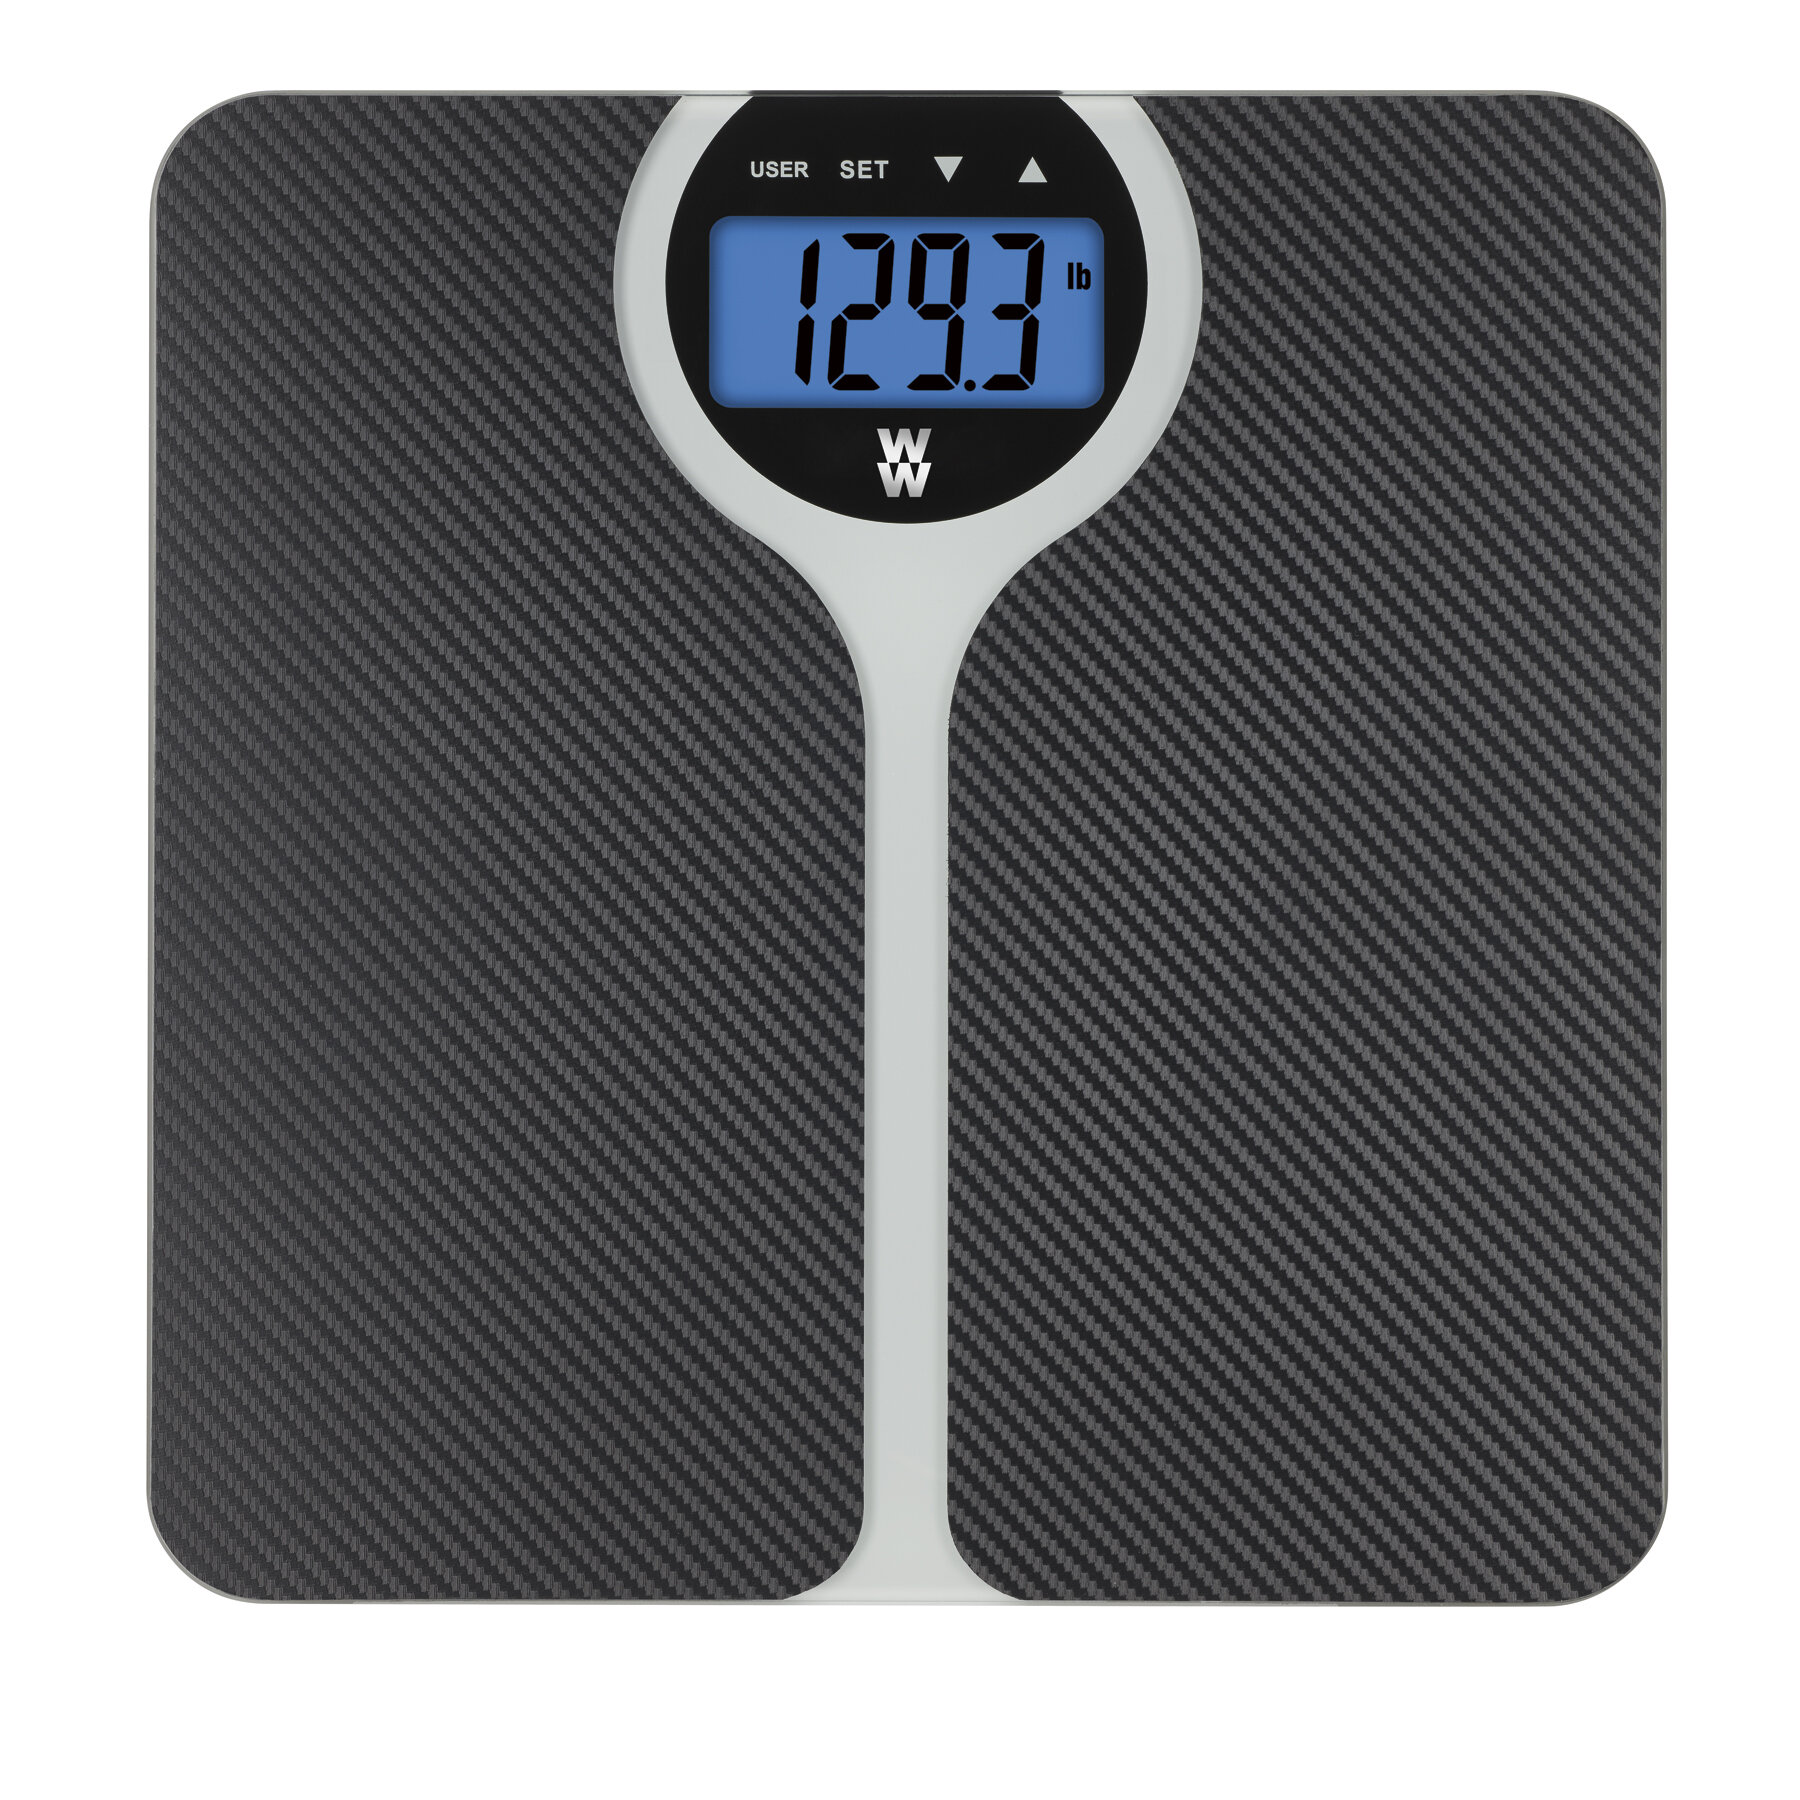 Weight Watchers Digital LCD Screen Bluetooth Scale Body Analysis Scale -  NEW